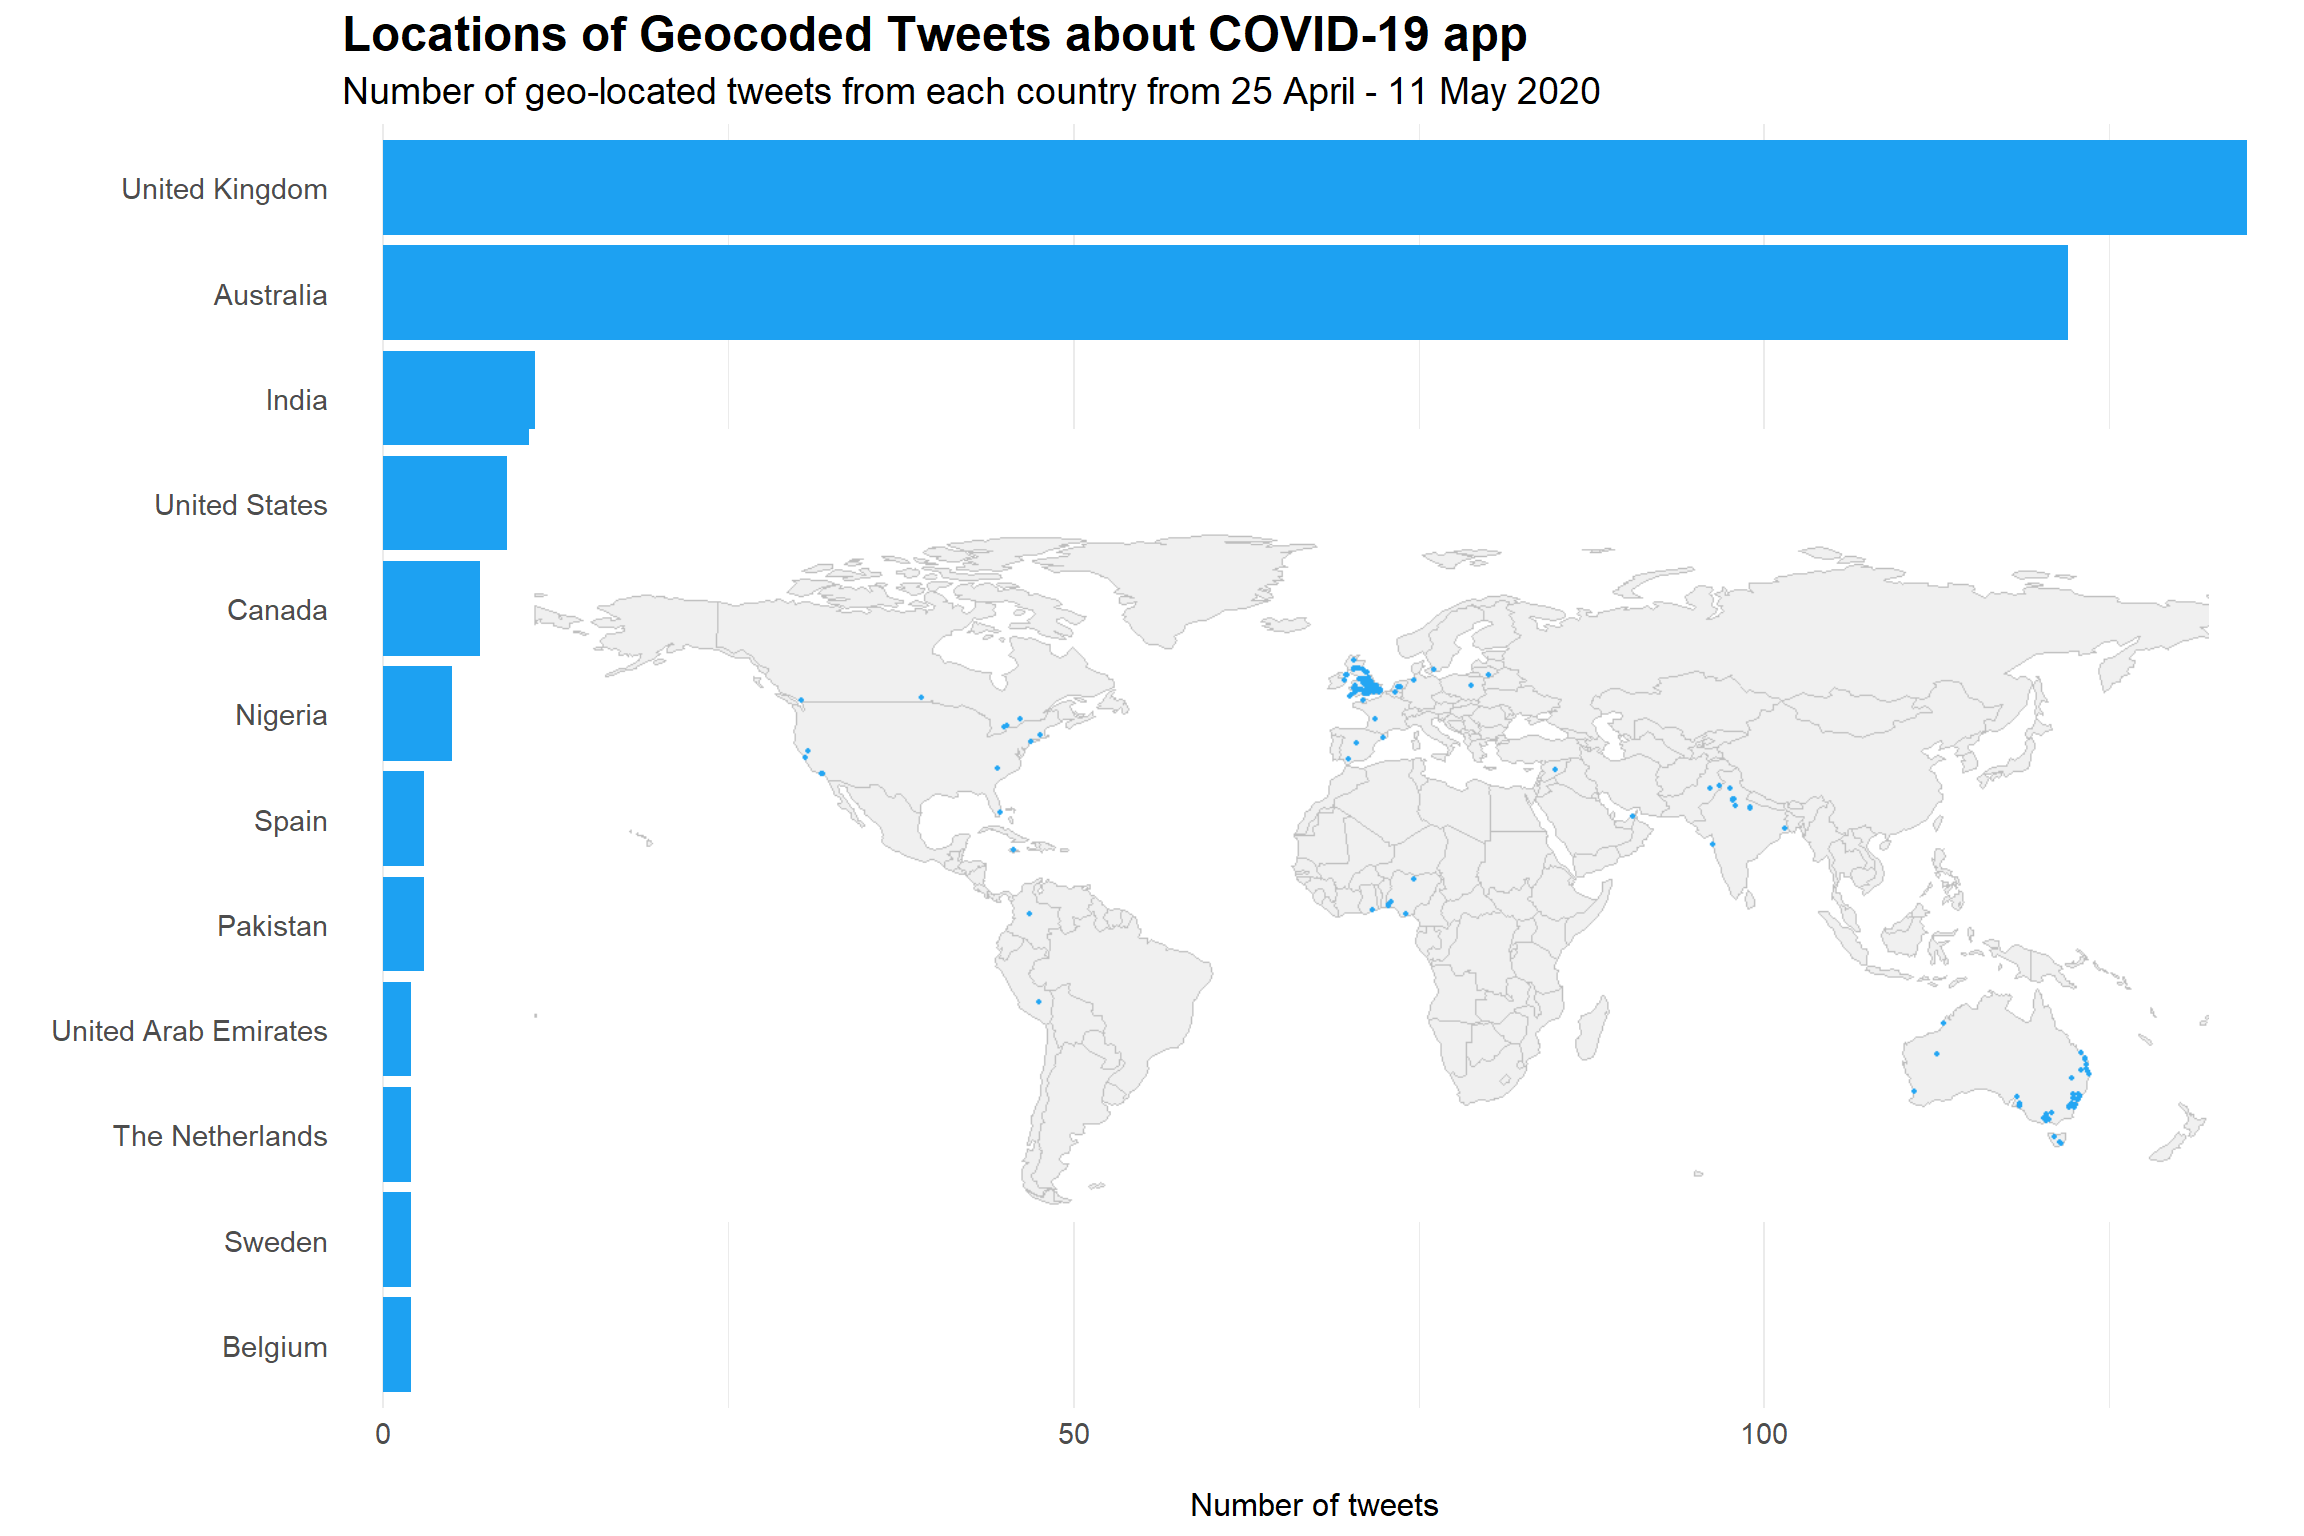 Graph showing locations of Geocoded Tweets about COVID-19 app - UK and Australia have the most tweets.